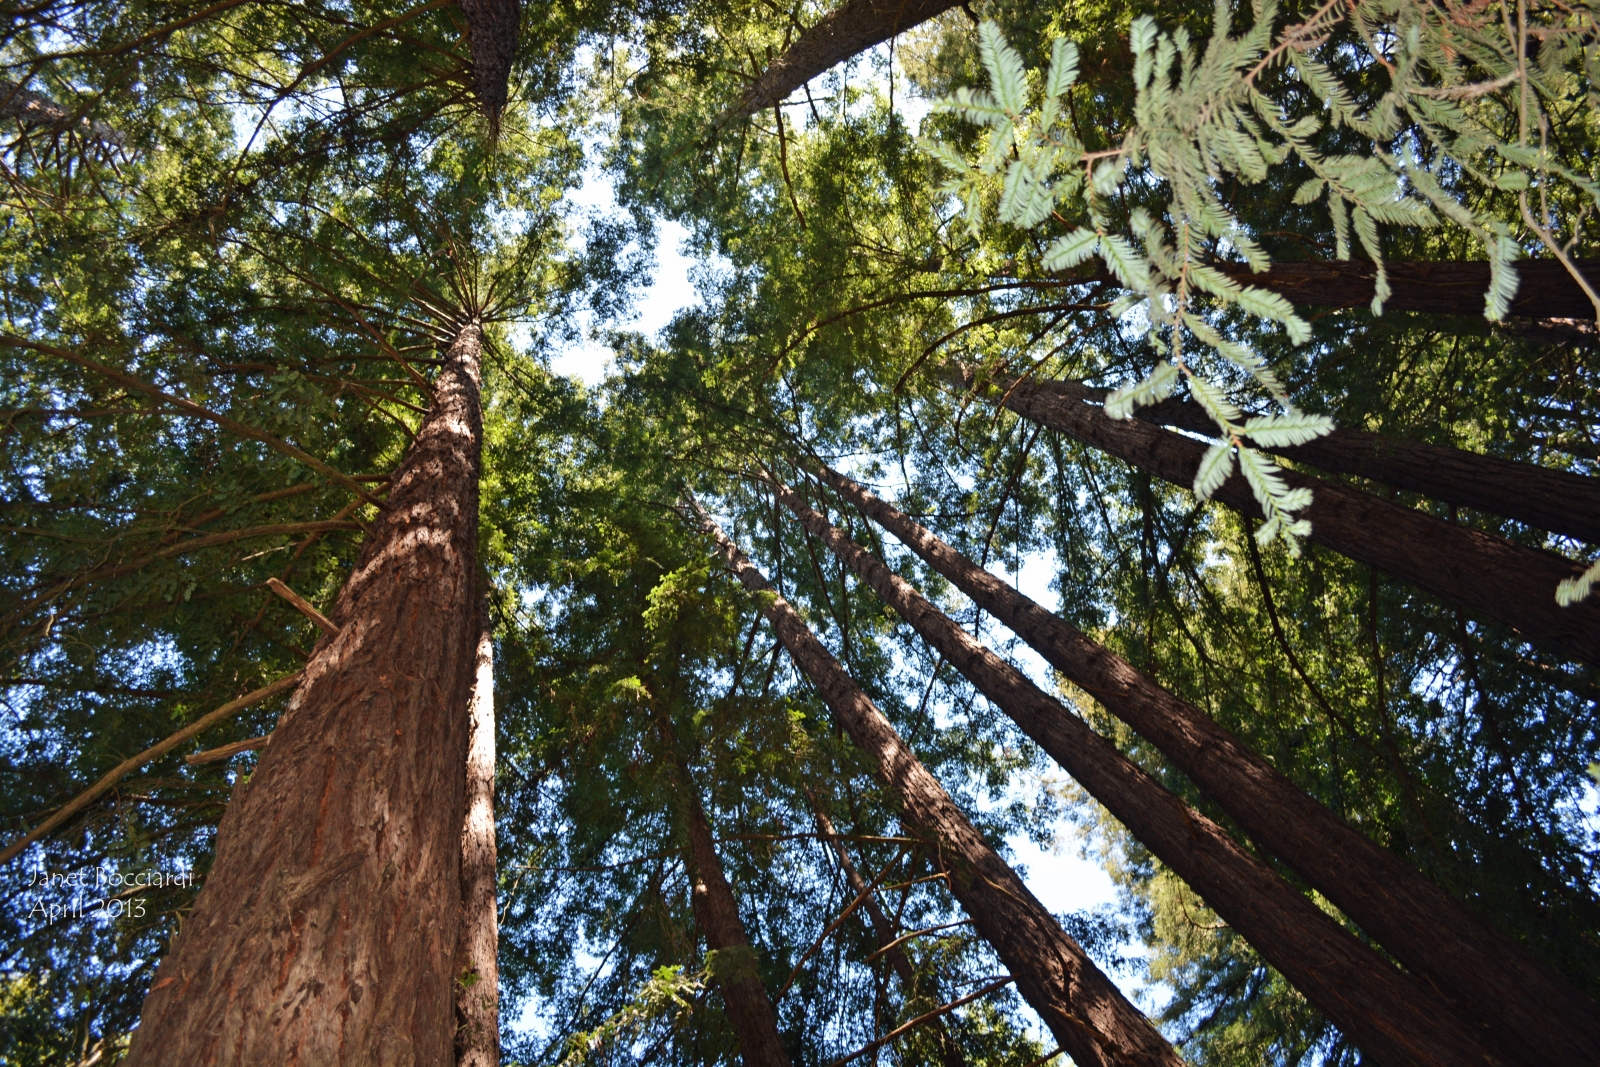 Looking Up in the Redwoods